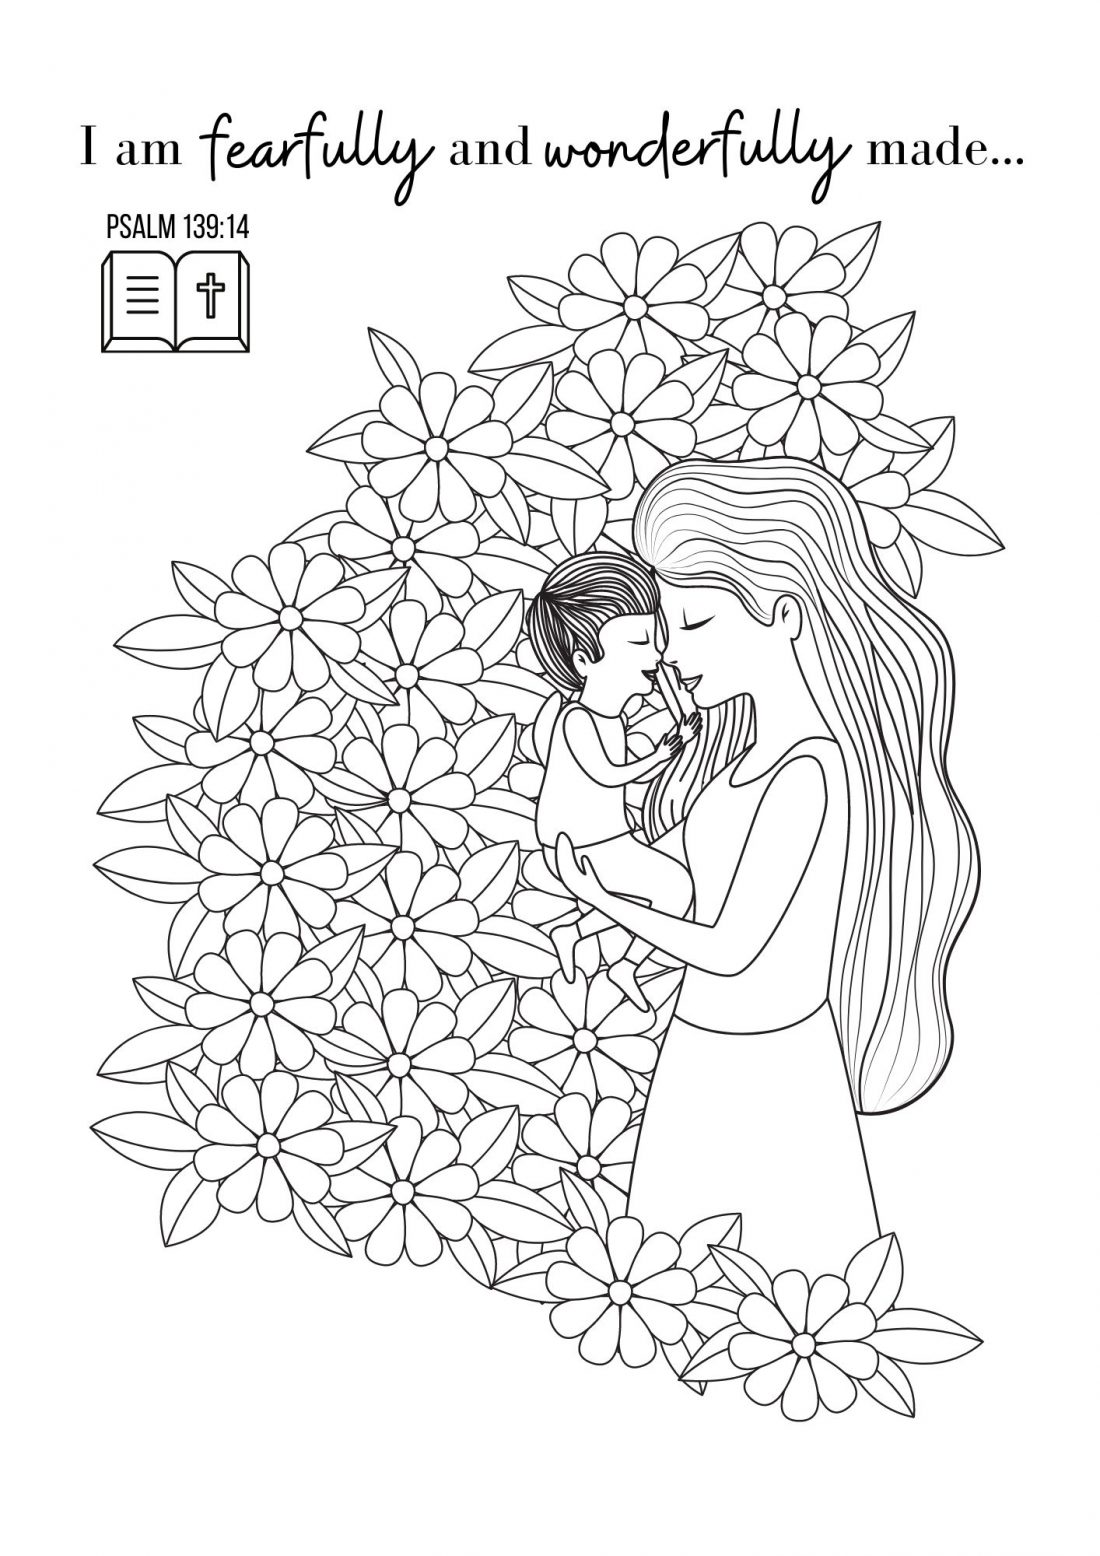 eggemeyers-childrens-bible-coloring-pages